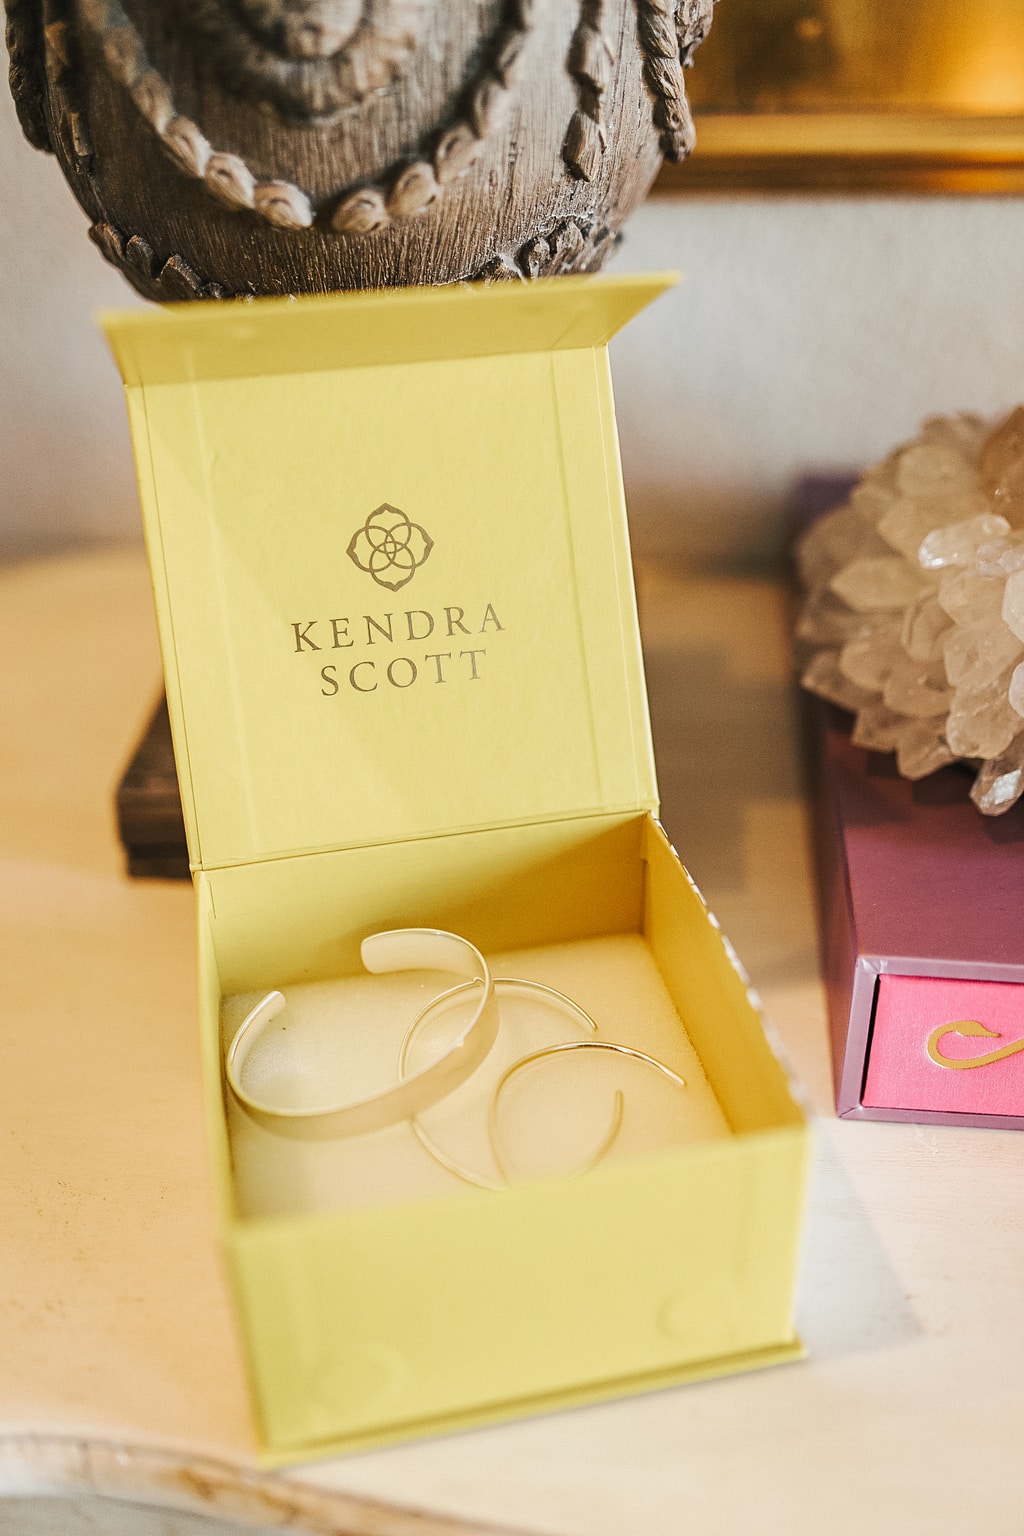 Kendra Scott Spring Collection Chronicles of Frivolity